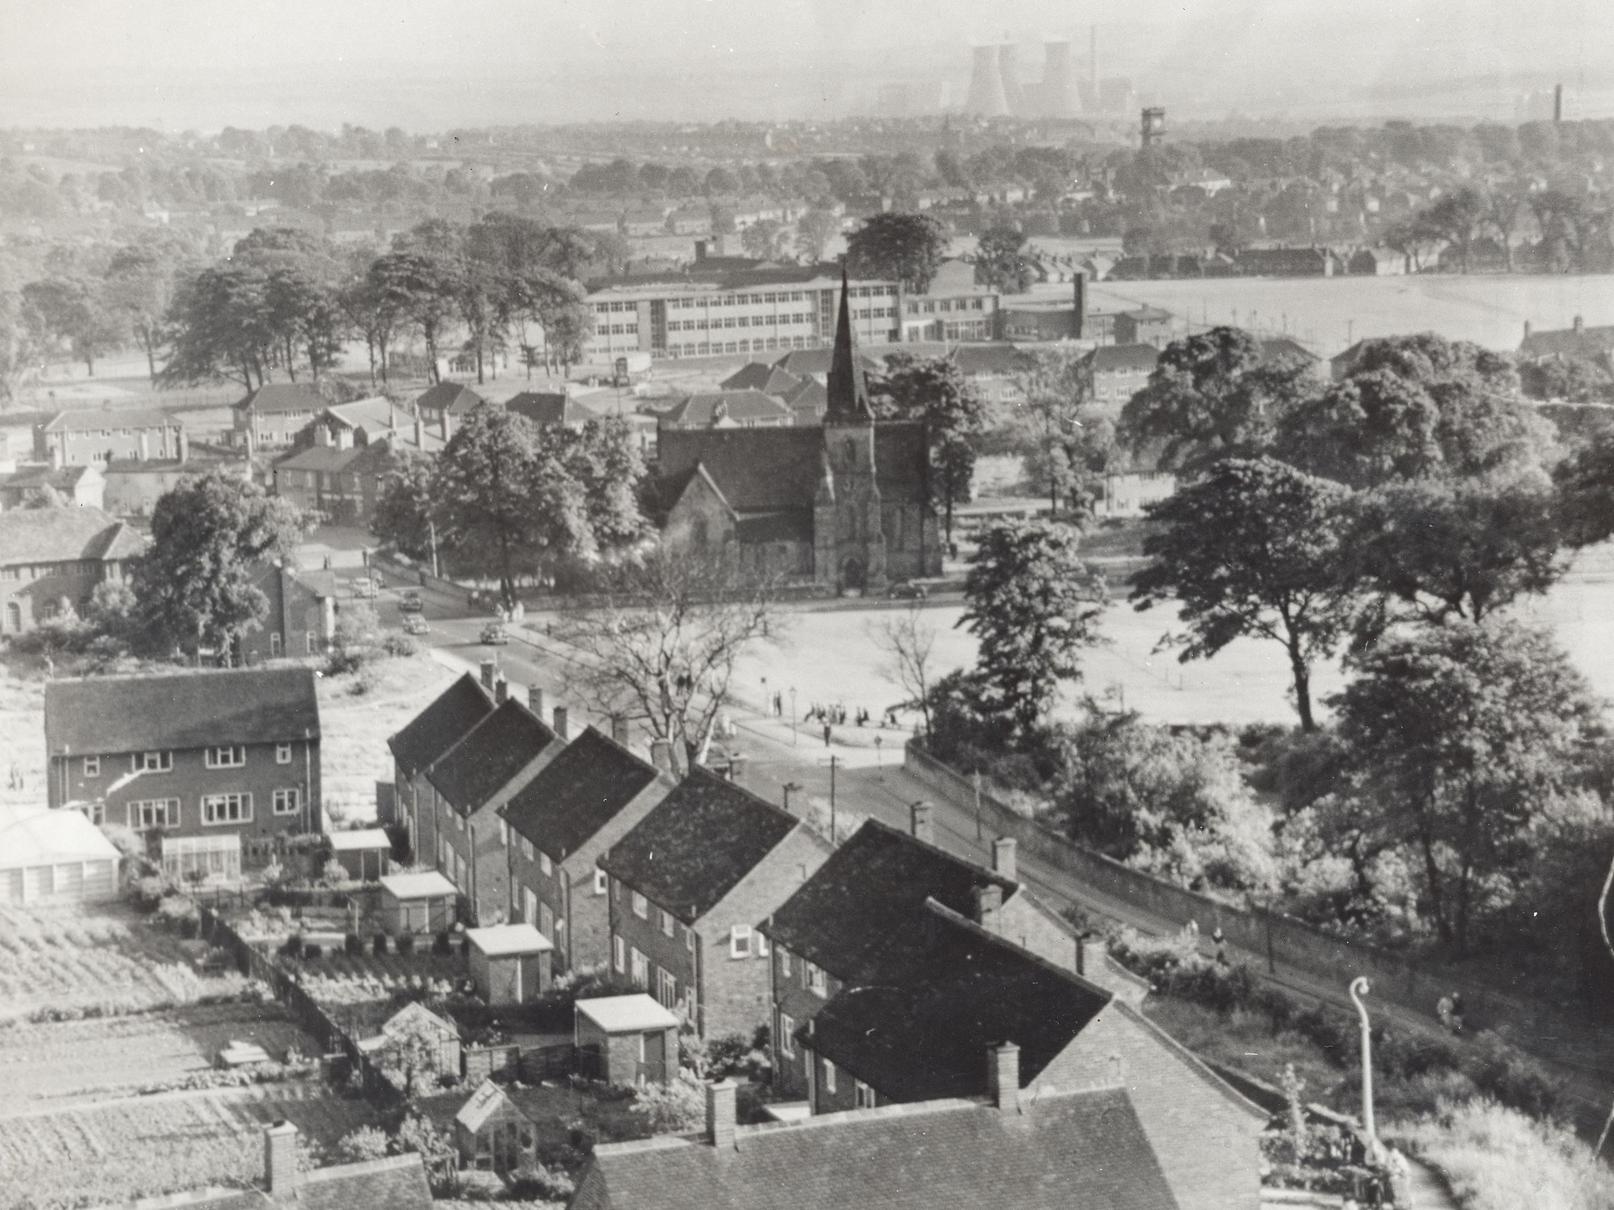 A view of Seacroft village at the end of the 1950s.